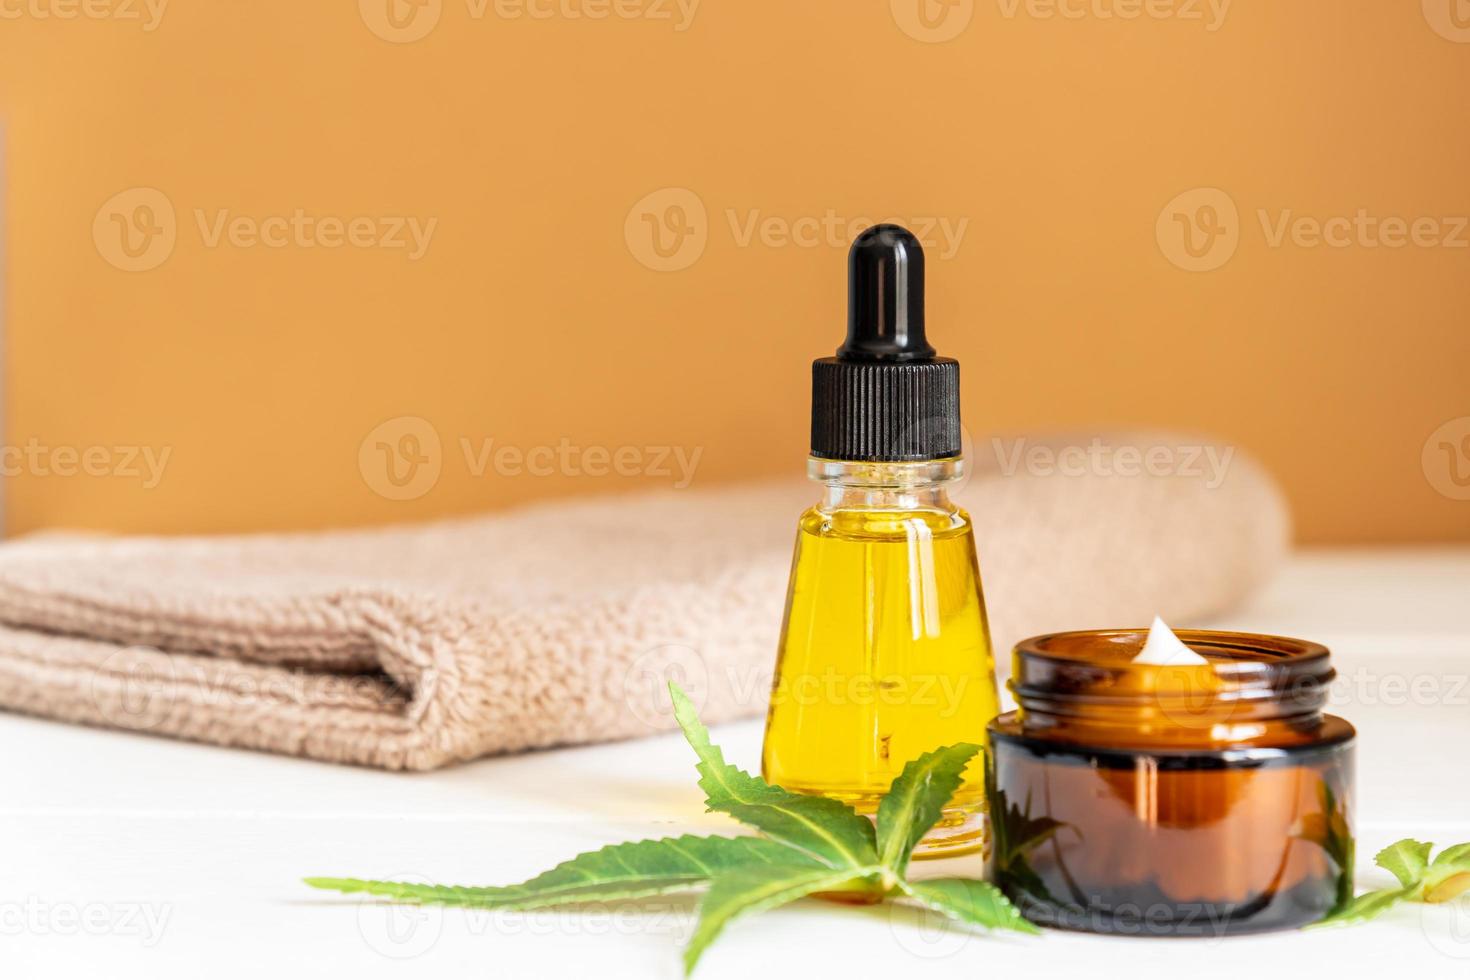 Cannabis face cream or serum or oil dropper concept. Natural cosmetic. CBD oil, THC tincture and hemp leaves on a wooden background photo